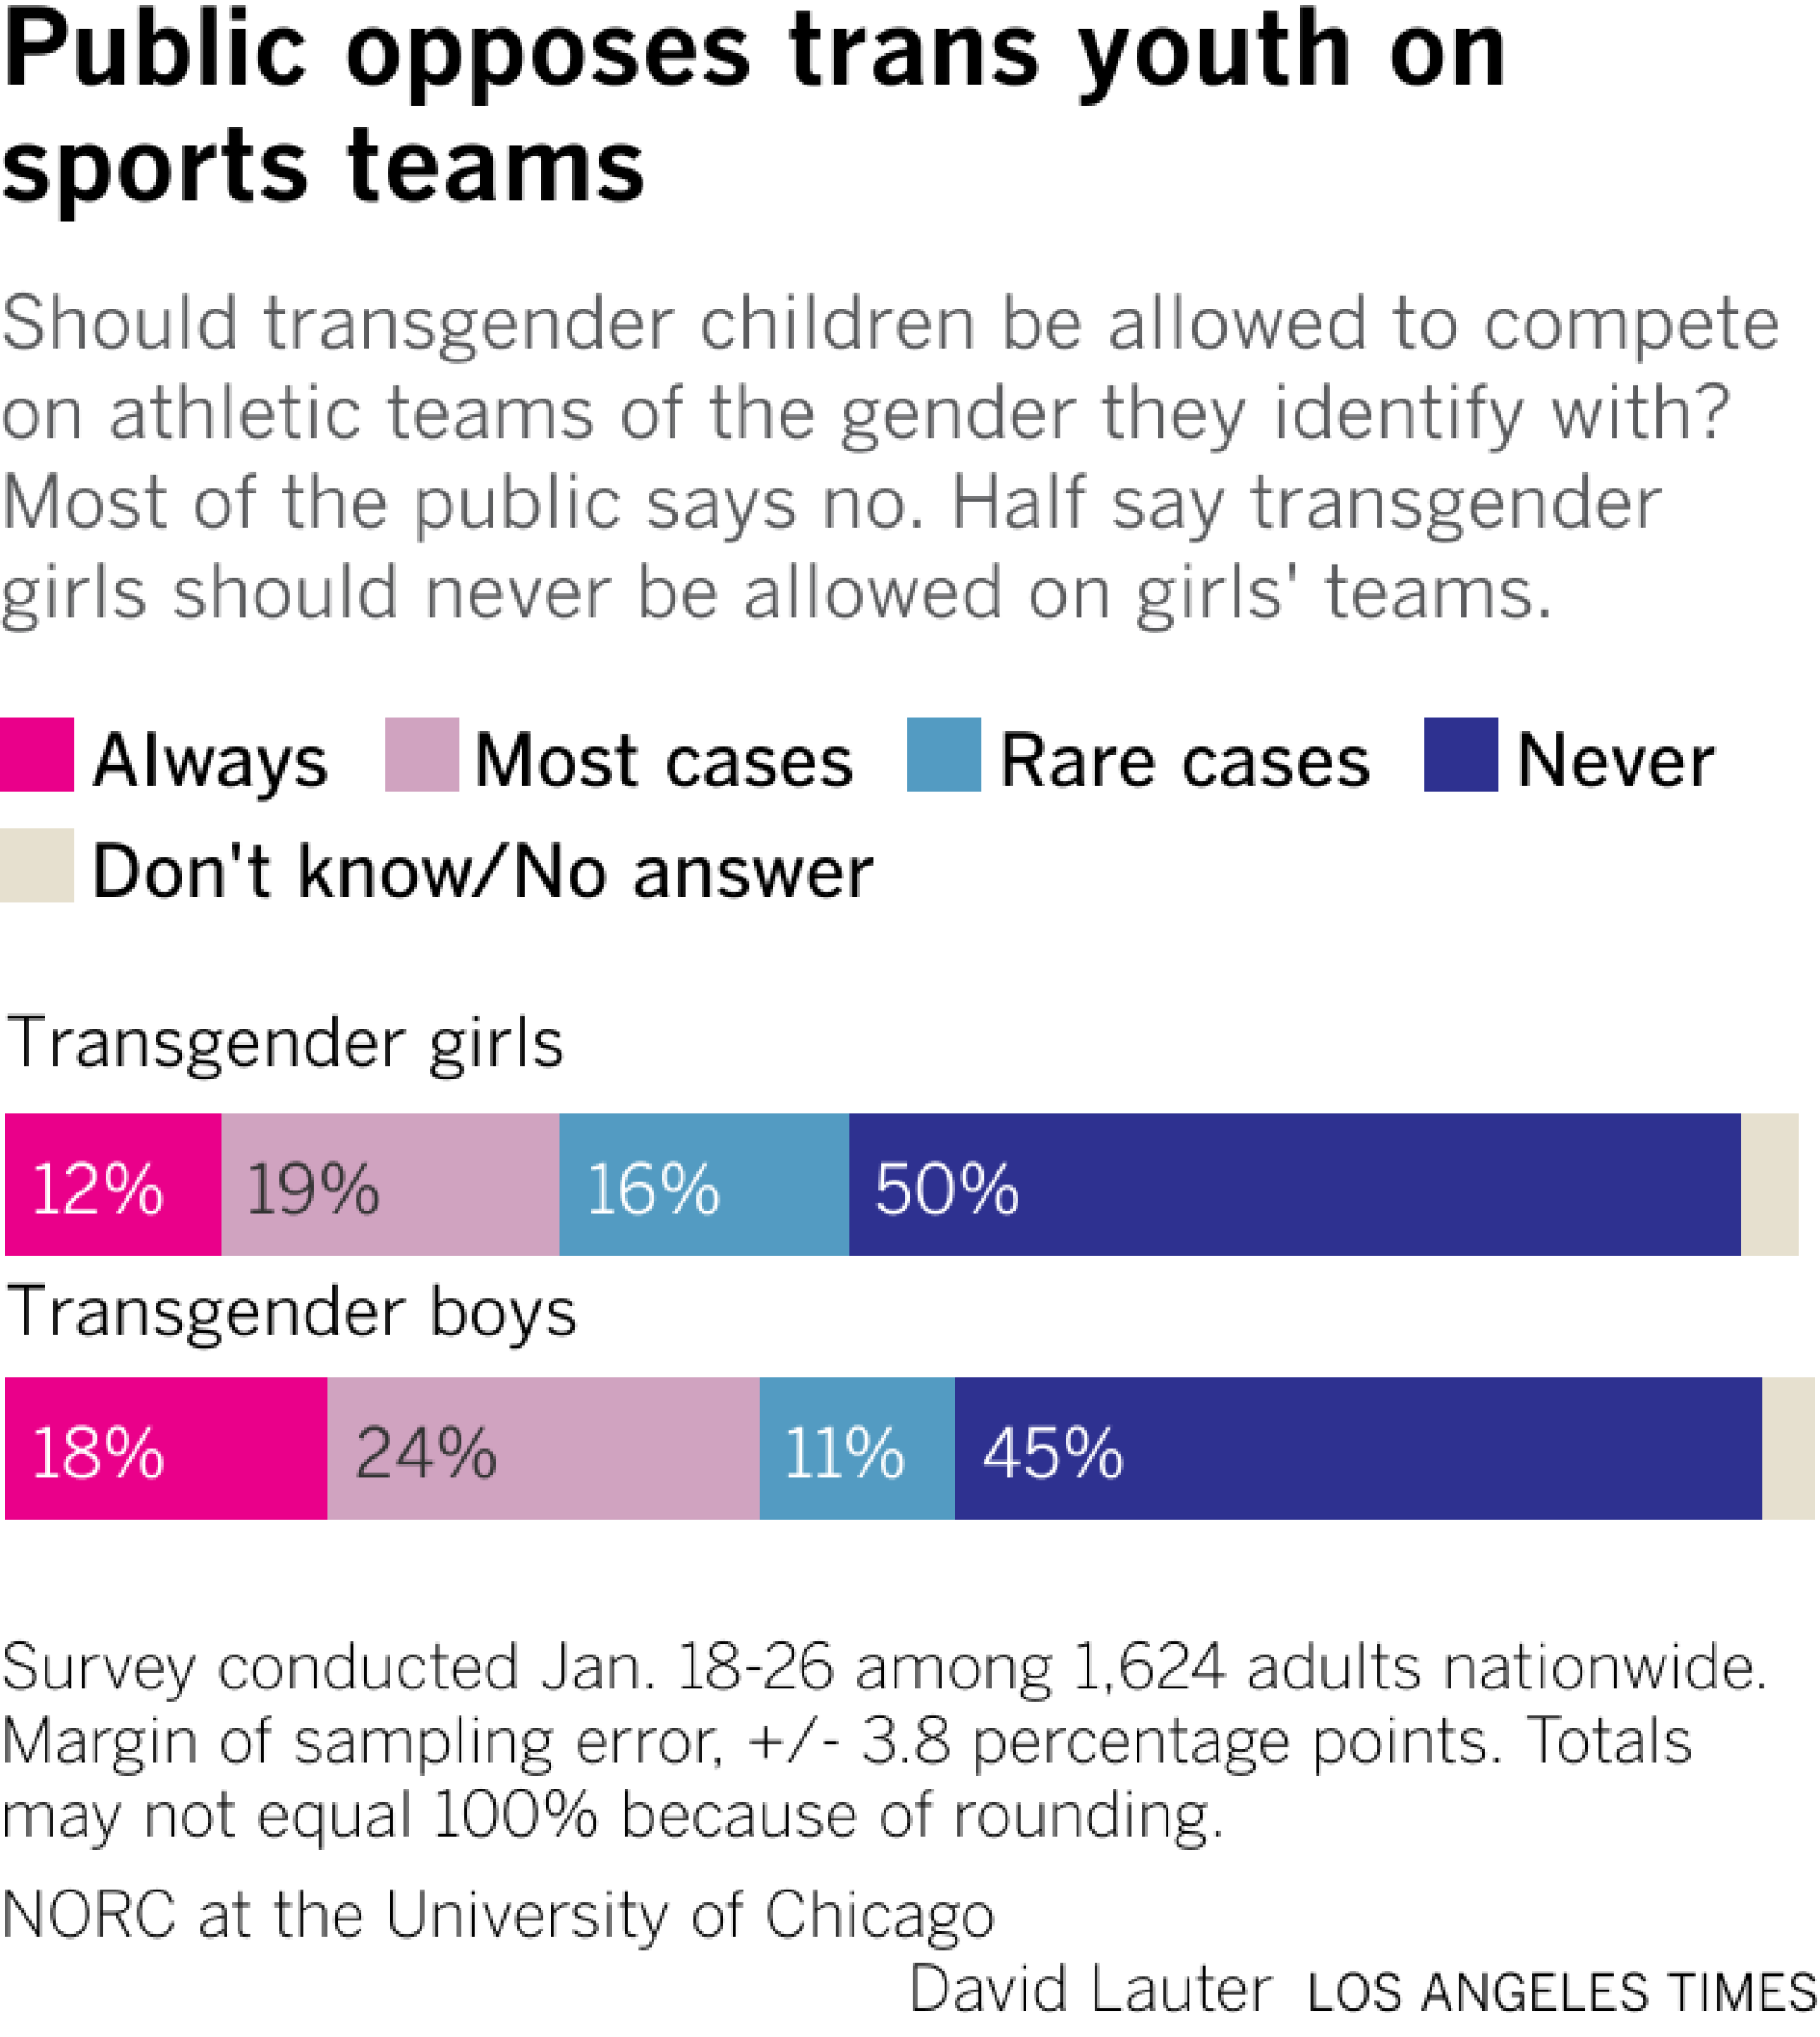 Bar chart shows how the public divides on the question of whether transgender girls should be allowed to compete on girls' teams and transgender boys on boys' teams.